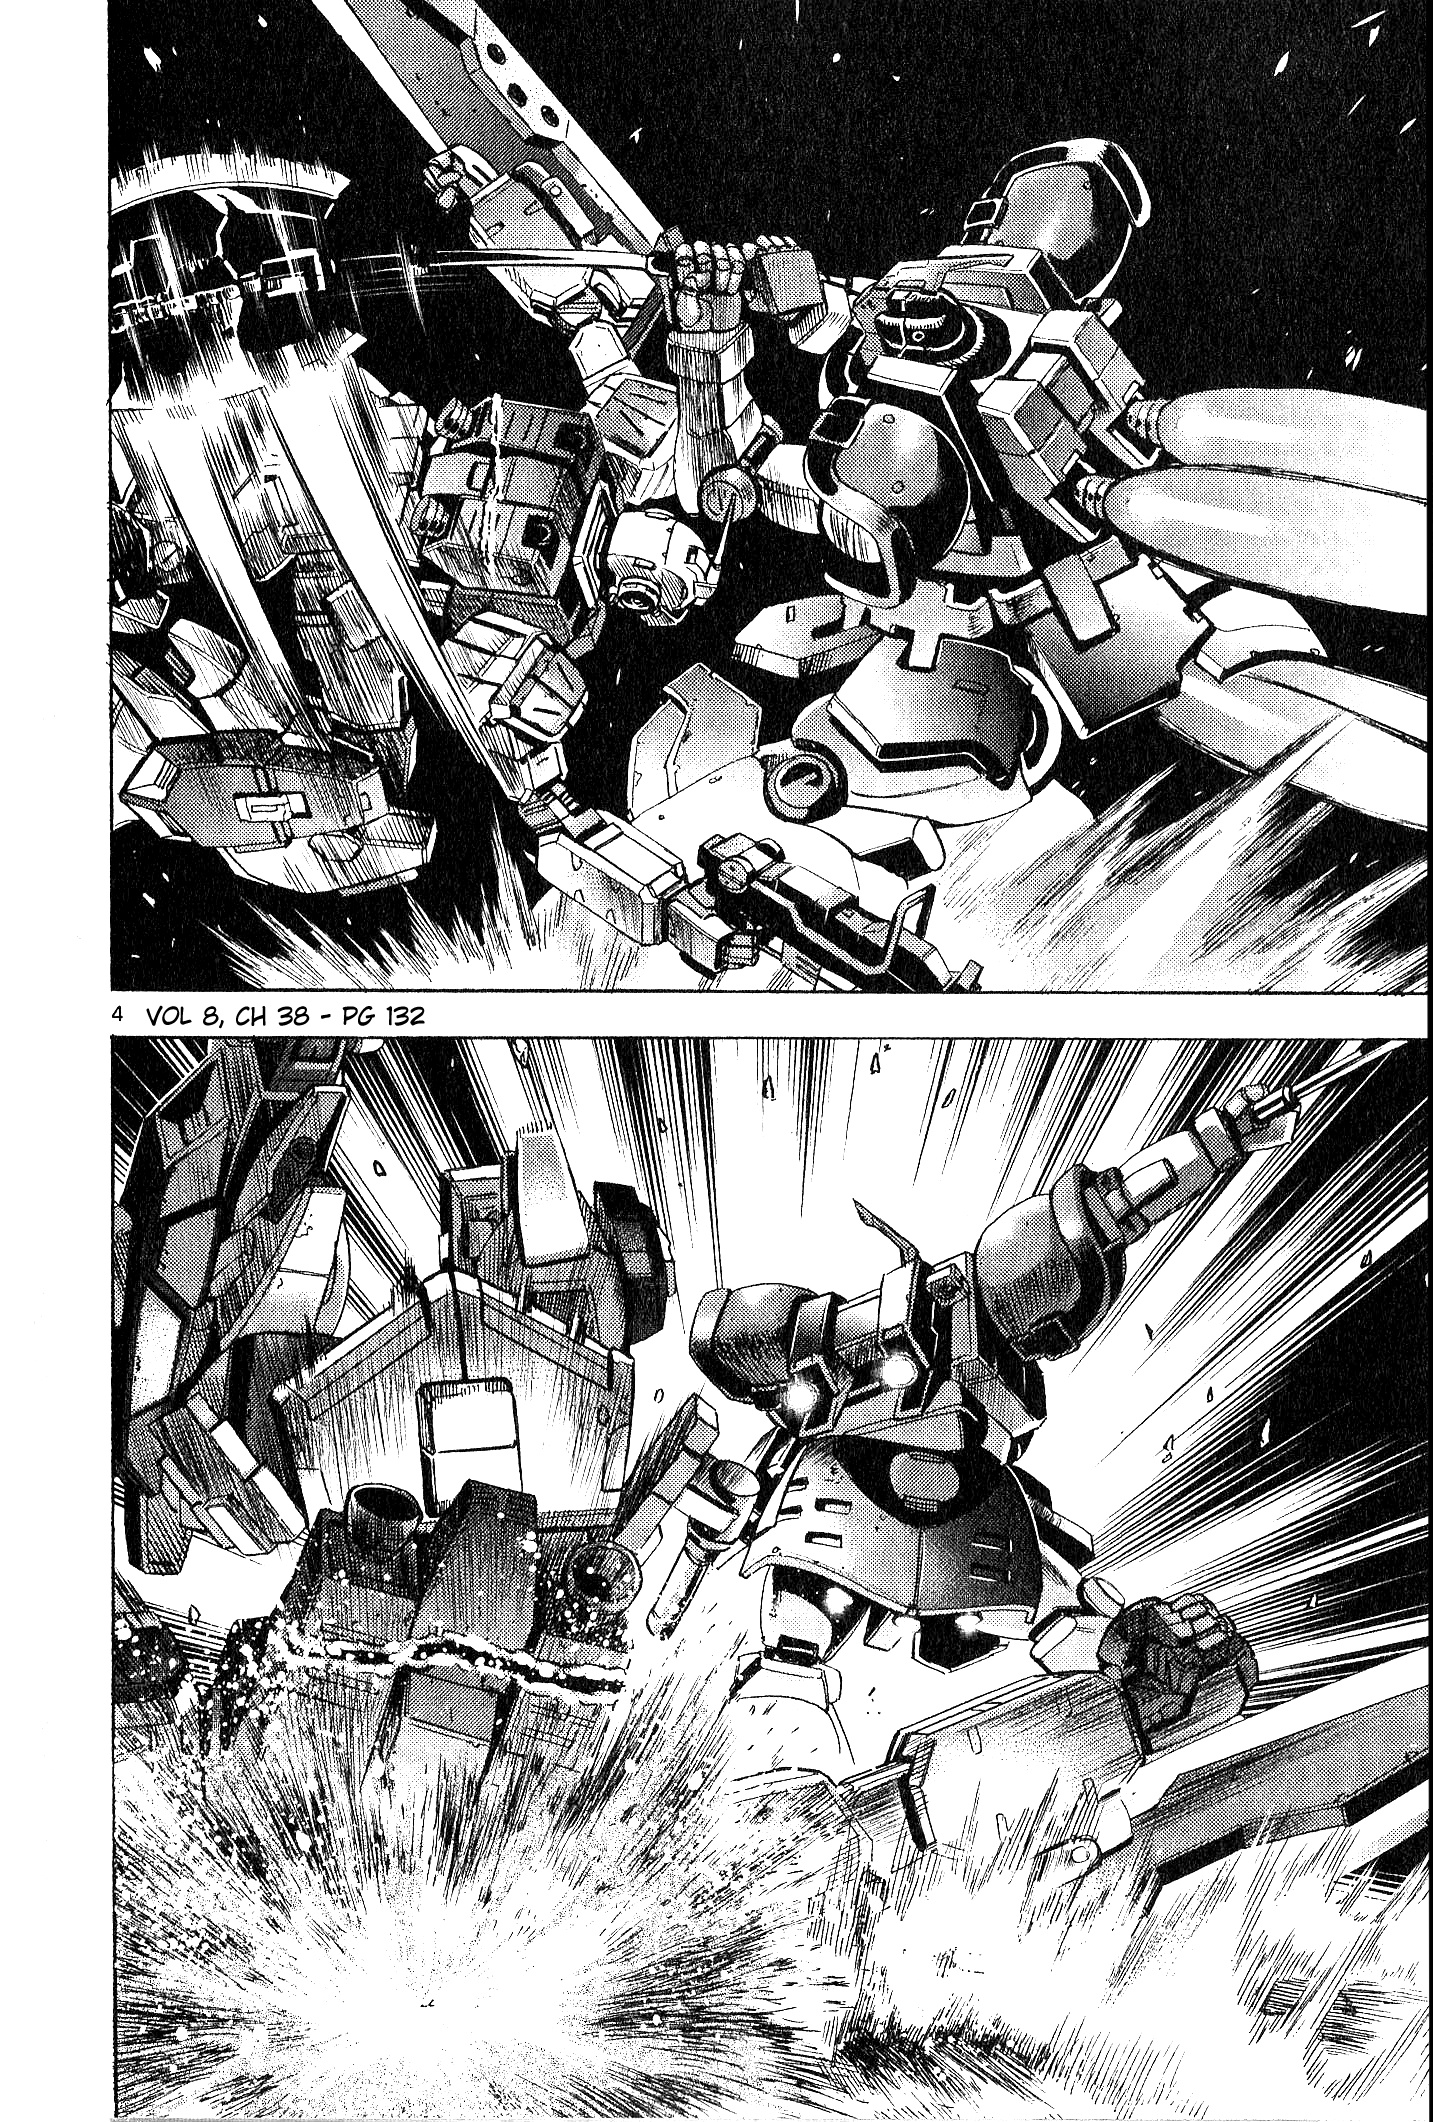 Mobile Suit Gundam Aggressor Vol.8 Chapter 38 - Picture 3